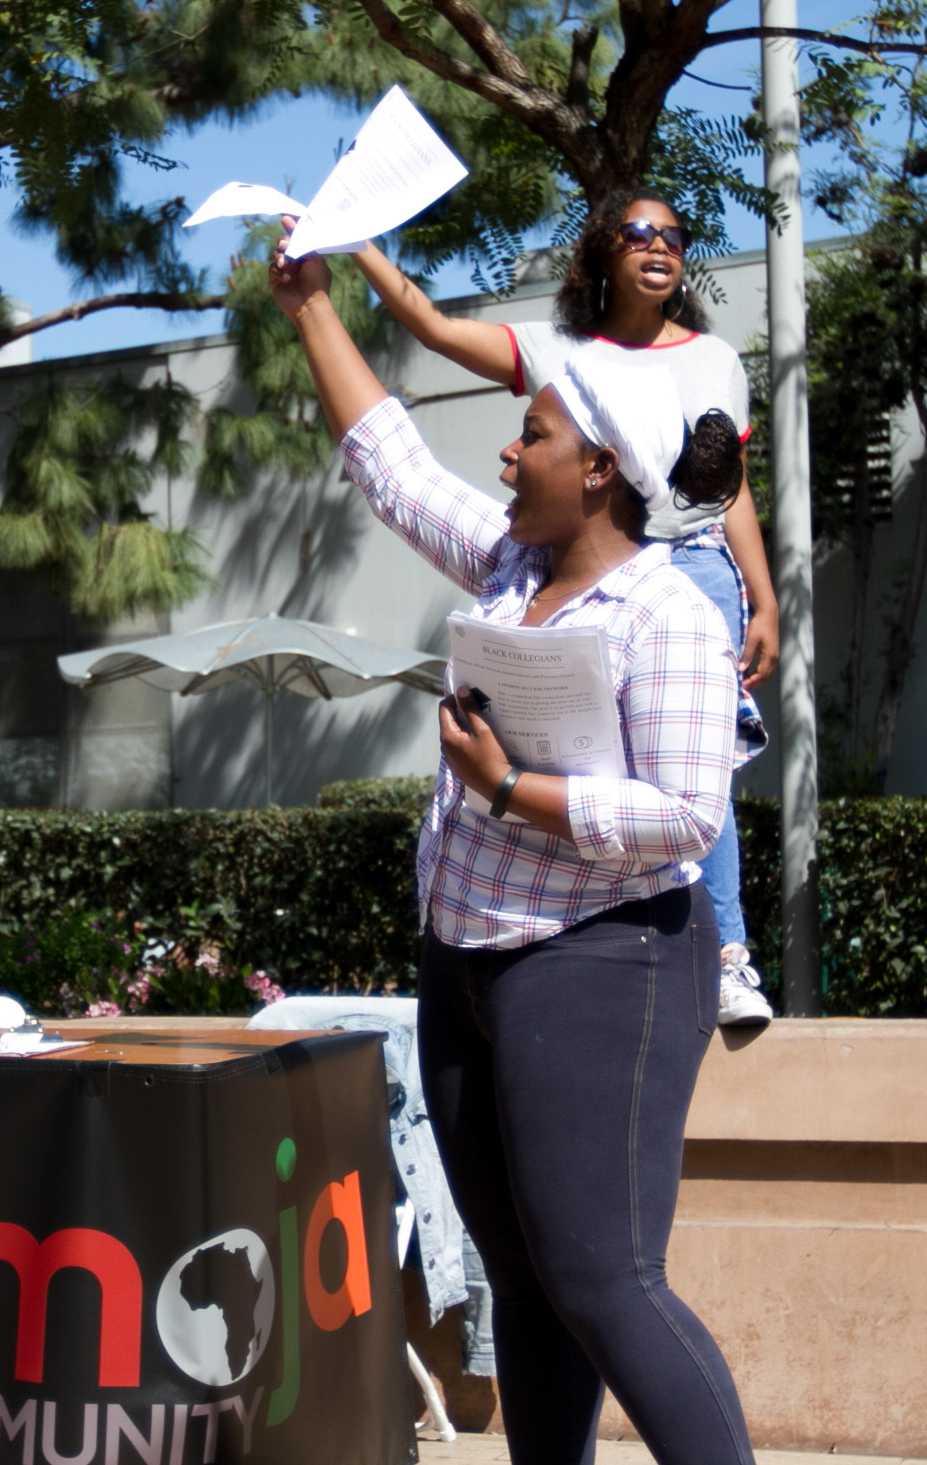  Black Collegians activity director Jessica Mebane (front), and Vice President Monique Muepo (back) recruit new members and spread awareness for their organization at Club Awareness Day at Santa Monica College in Santa Monica California on March 14, 